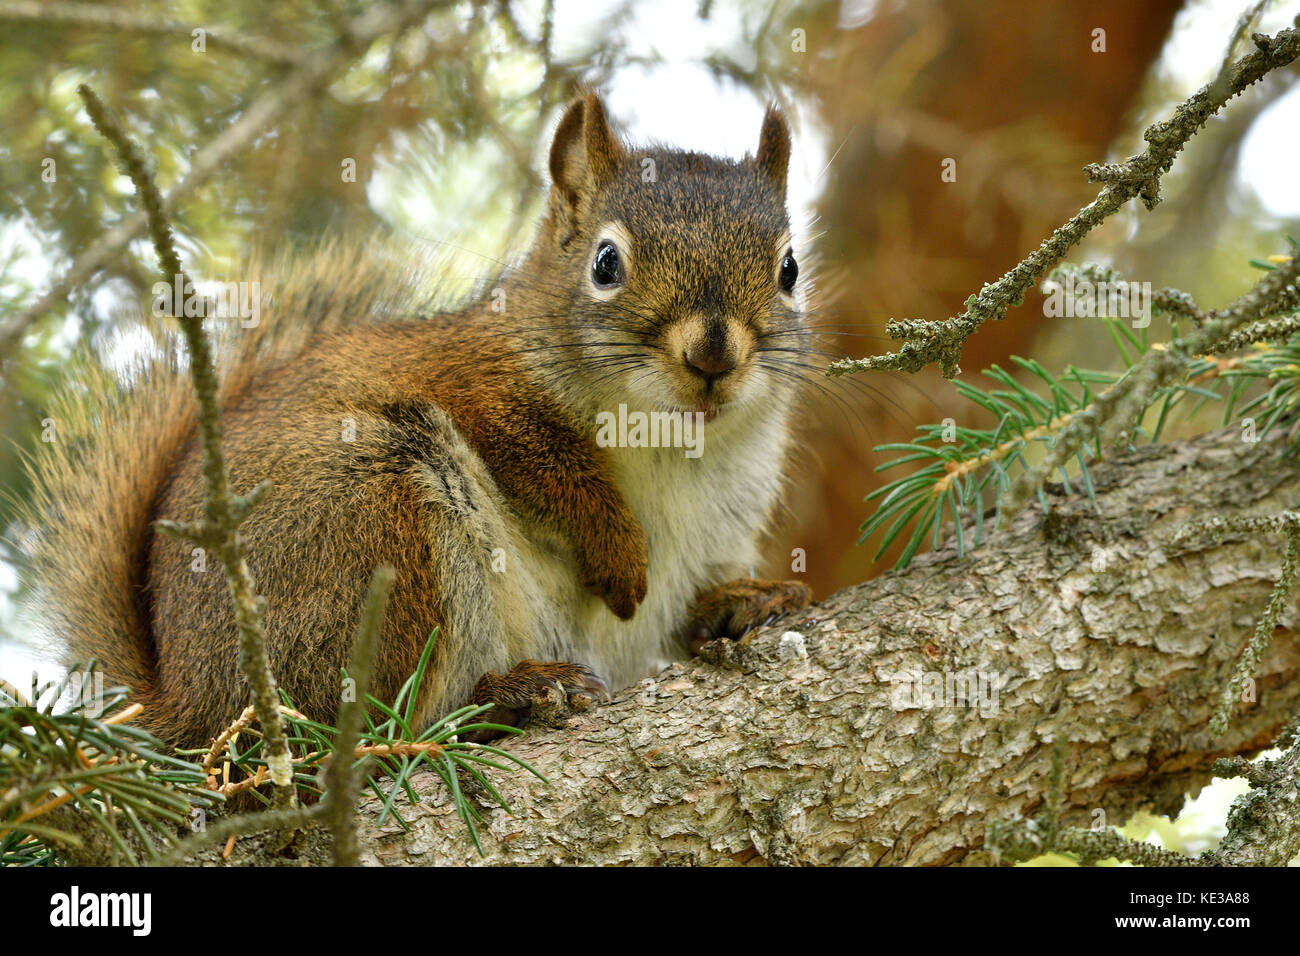 A close up image of a red squirrel, (Tamiasciurus hudsonicus); on a spruce tree branch in his natural habitat  in rural Alberta Canada Stock Photo